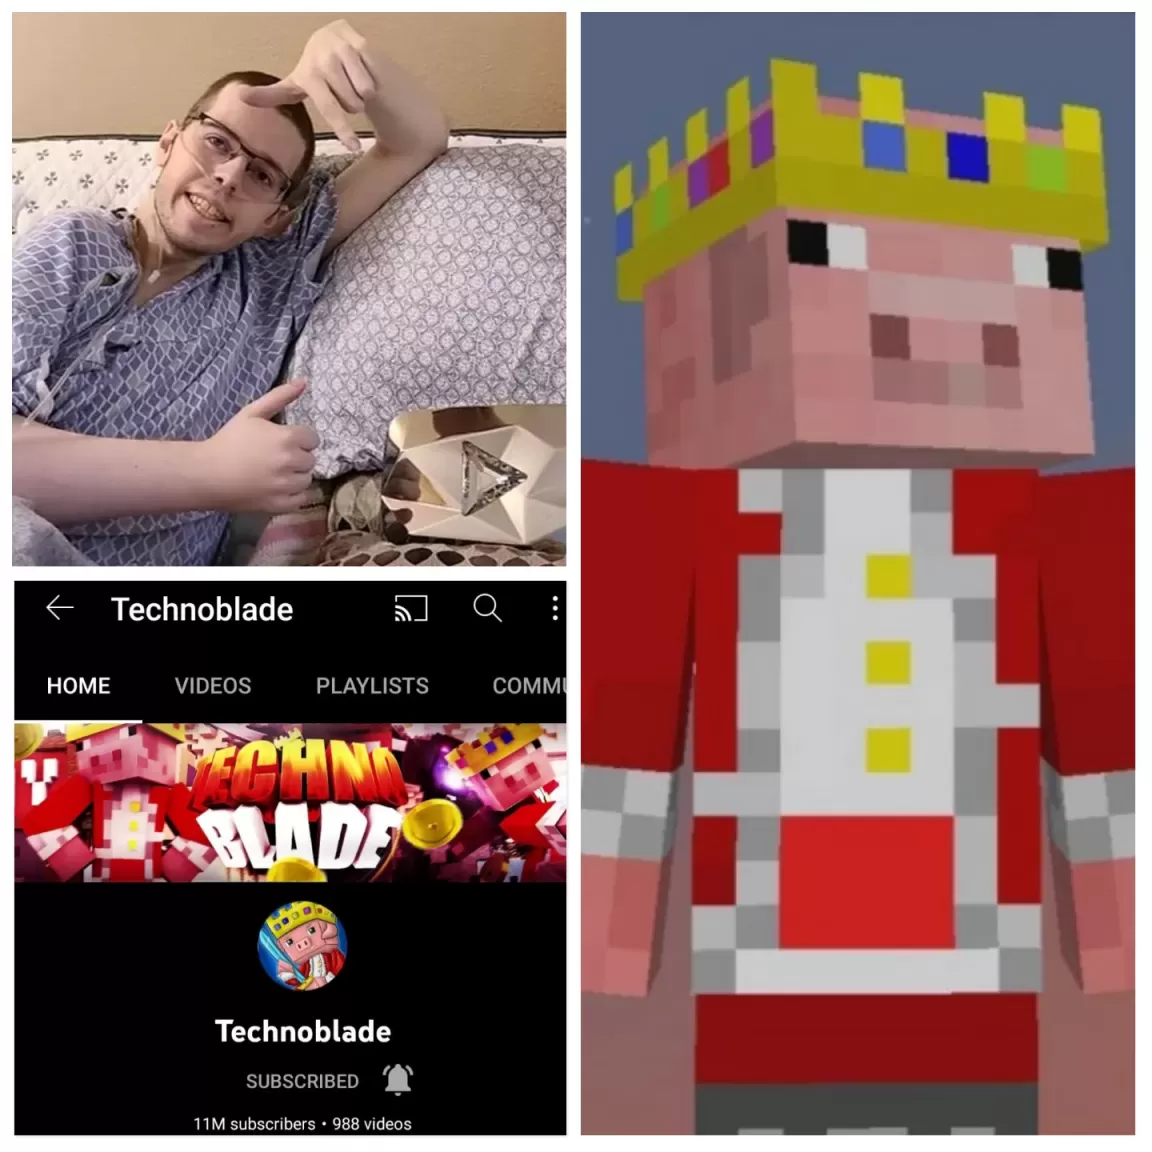 Technoblade, a Minecraft YouTuber who a lot of people watched, died at age 23